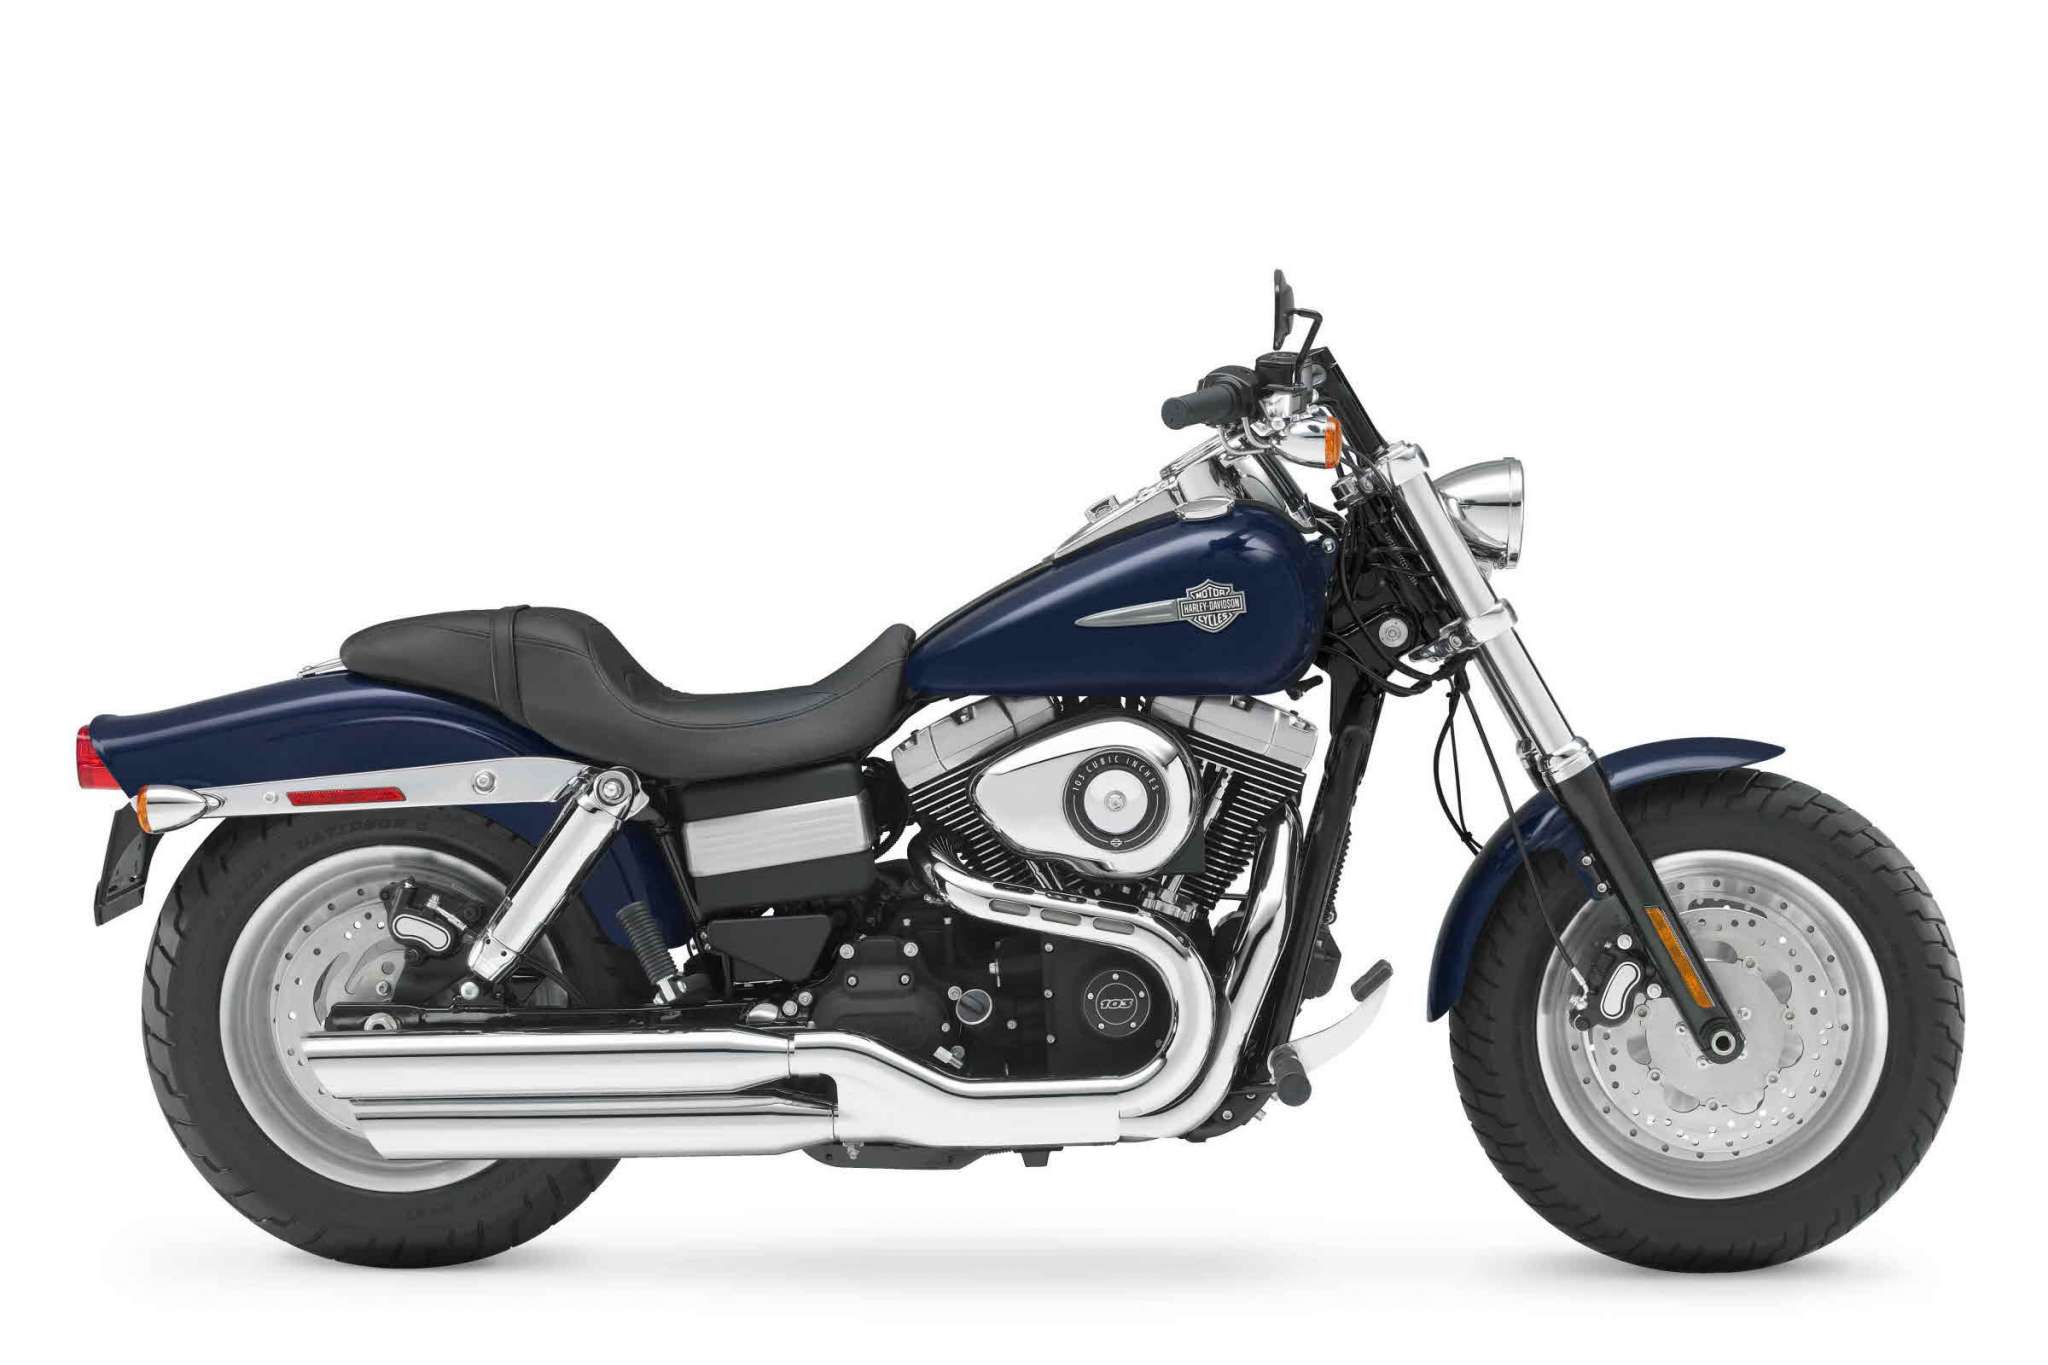 Harley Davidson 103 Cubic Inches Price Factory Sale, UP TO 64% OFF 